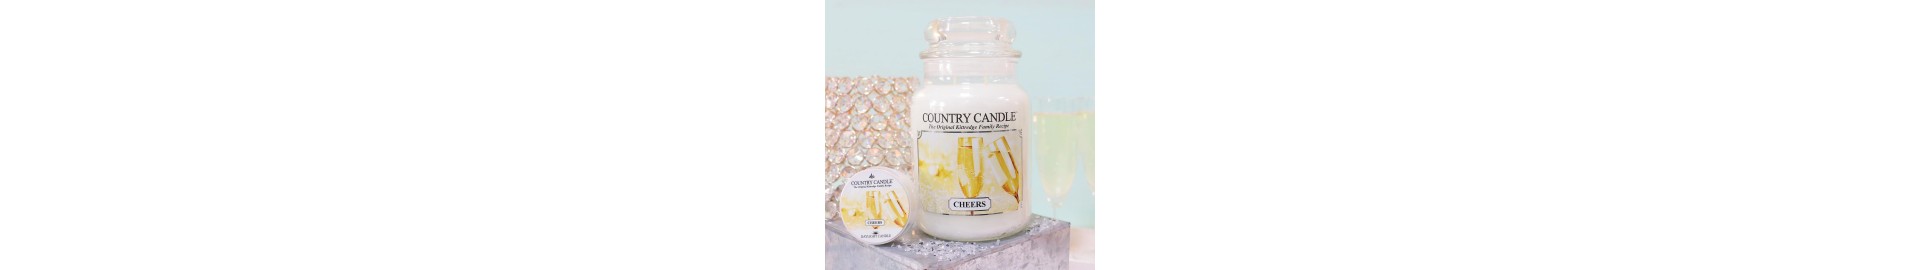 GRANDE JARRE COUNTRY CANDLE